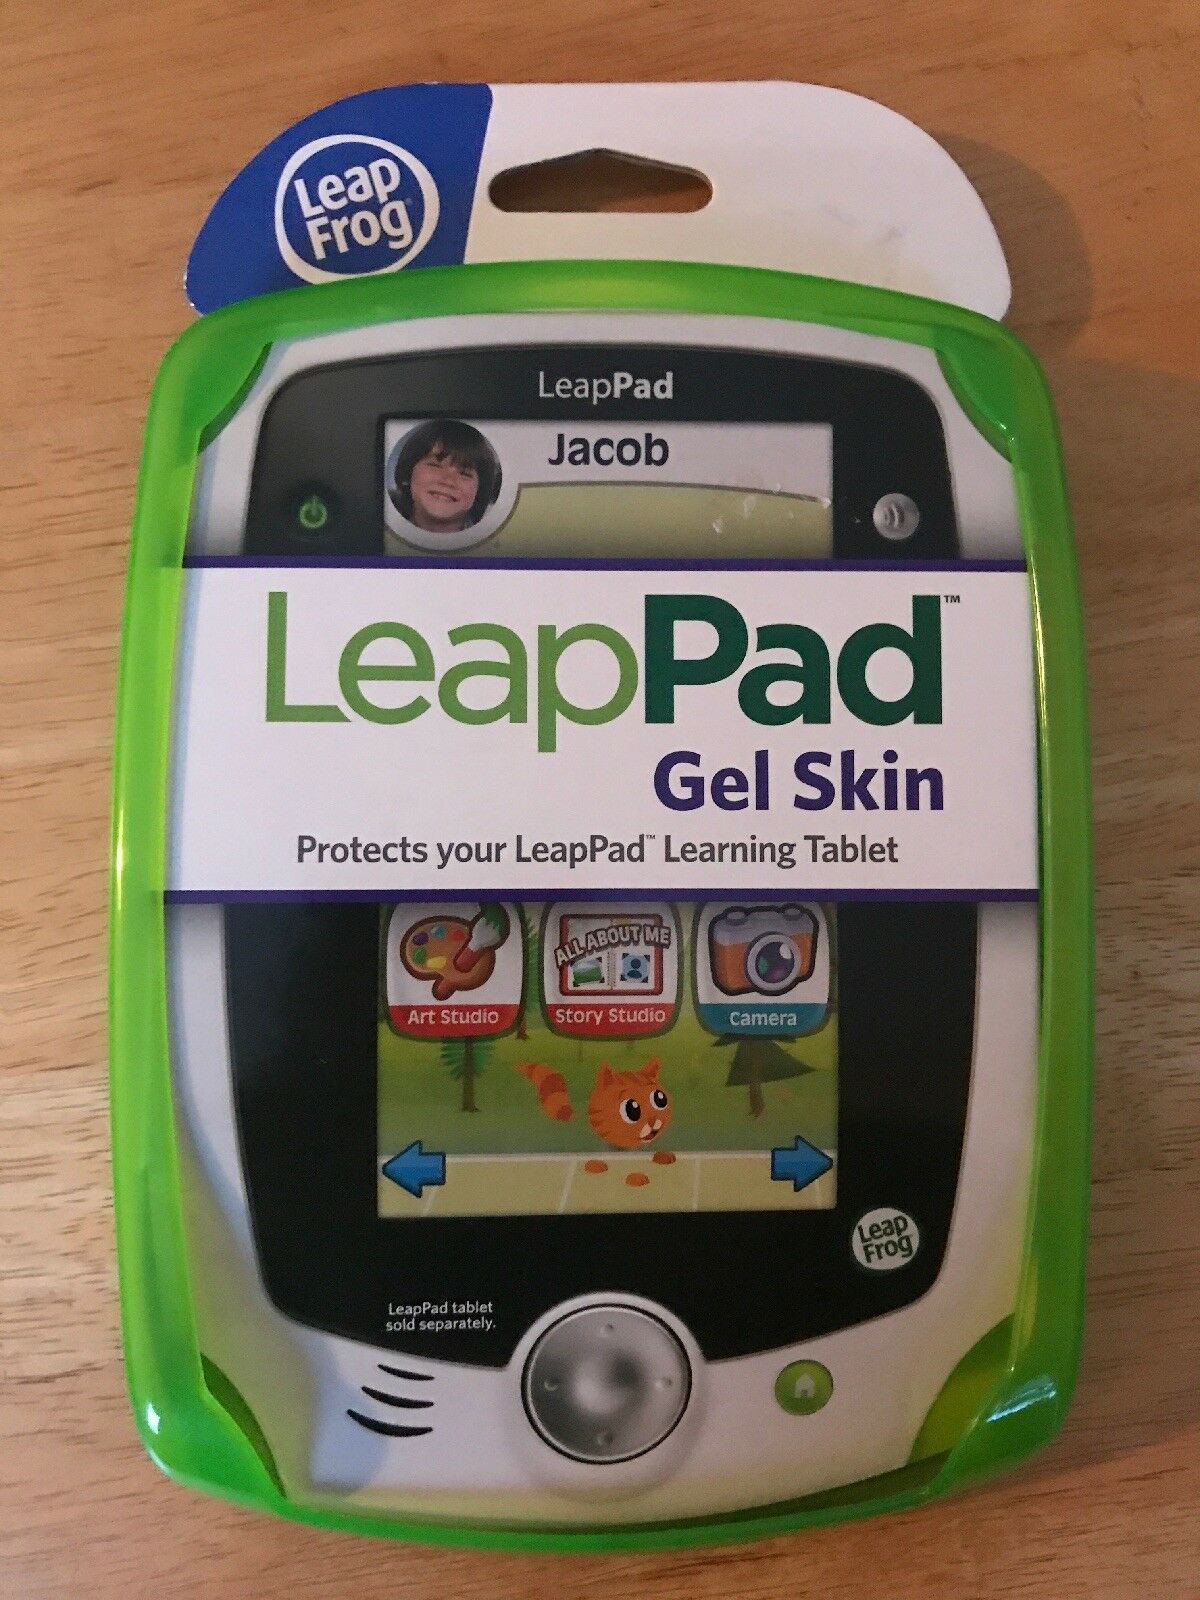 Leapfrog Leappad1 Gel Skin, Green Works Only With Leappad1